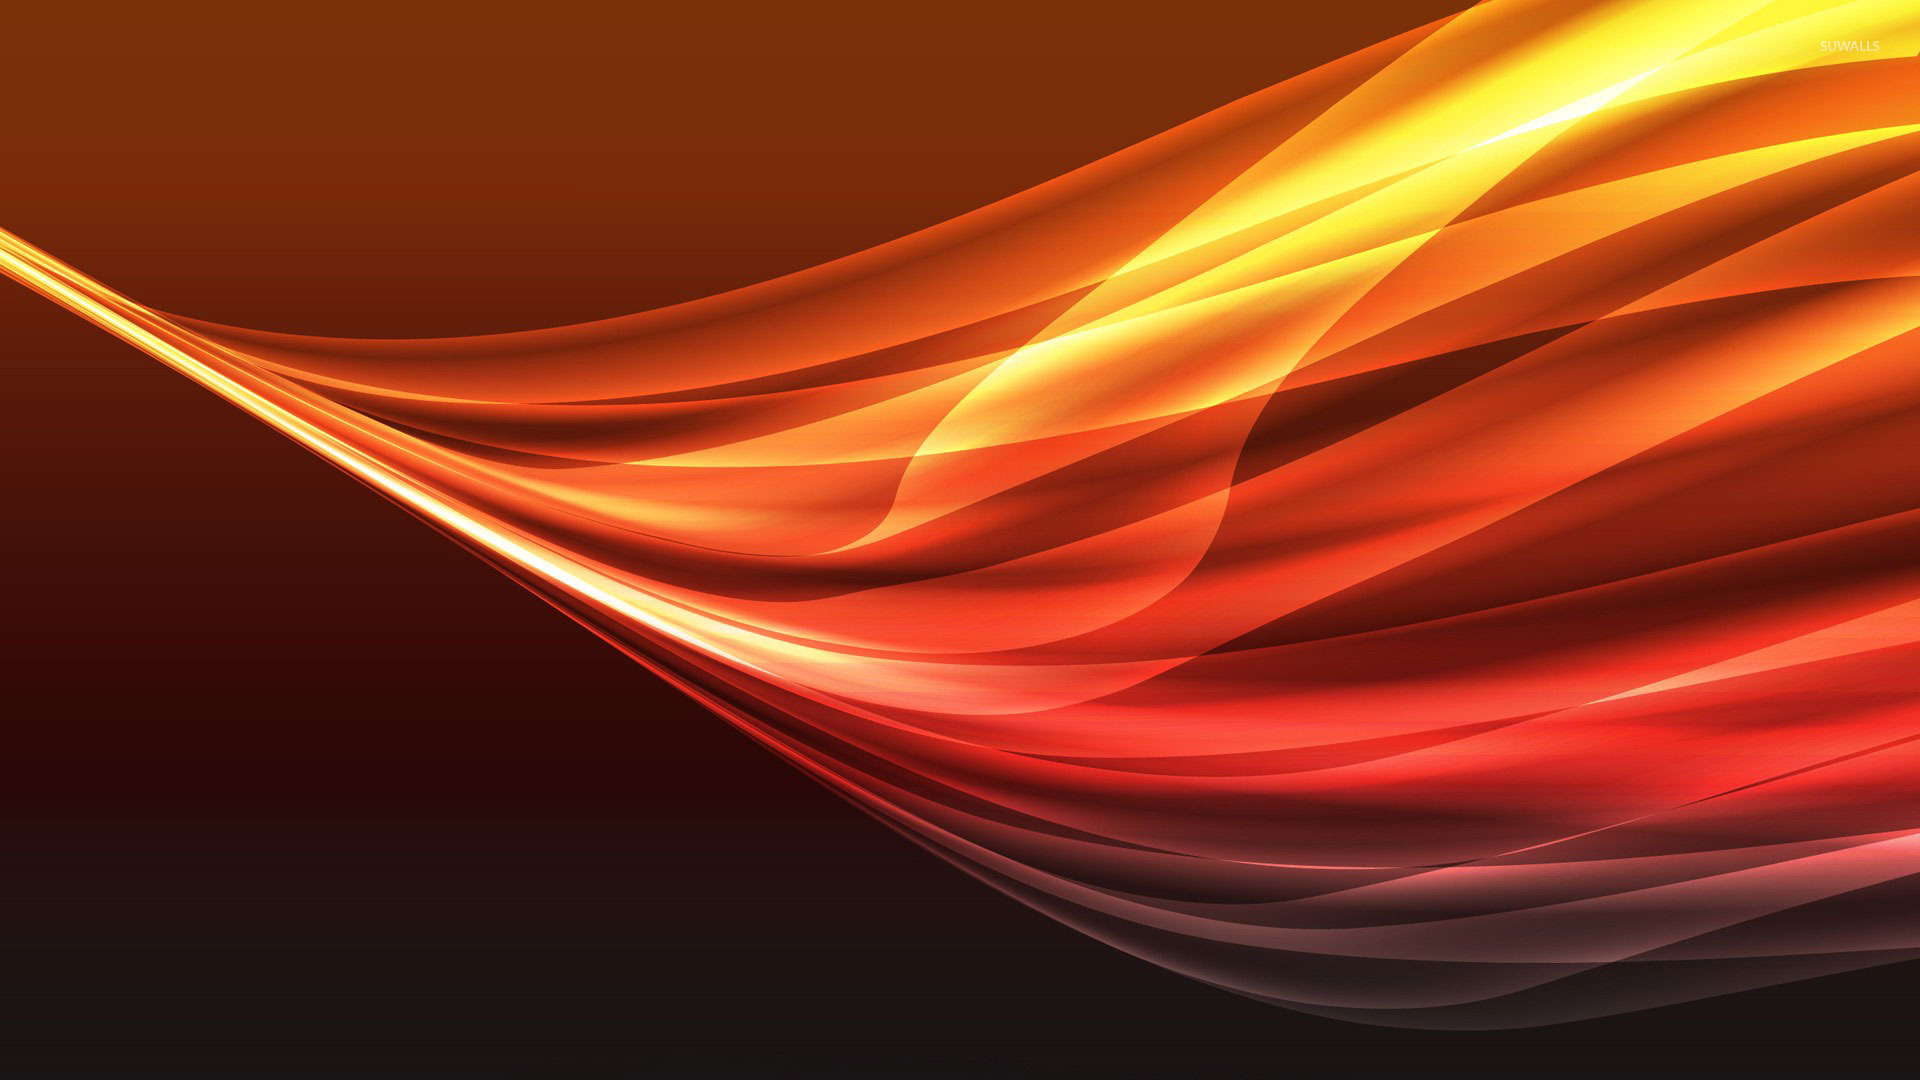 Orange gradient curves wallpaper - Abstract wallpapers - #24183